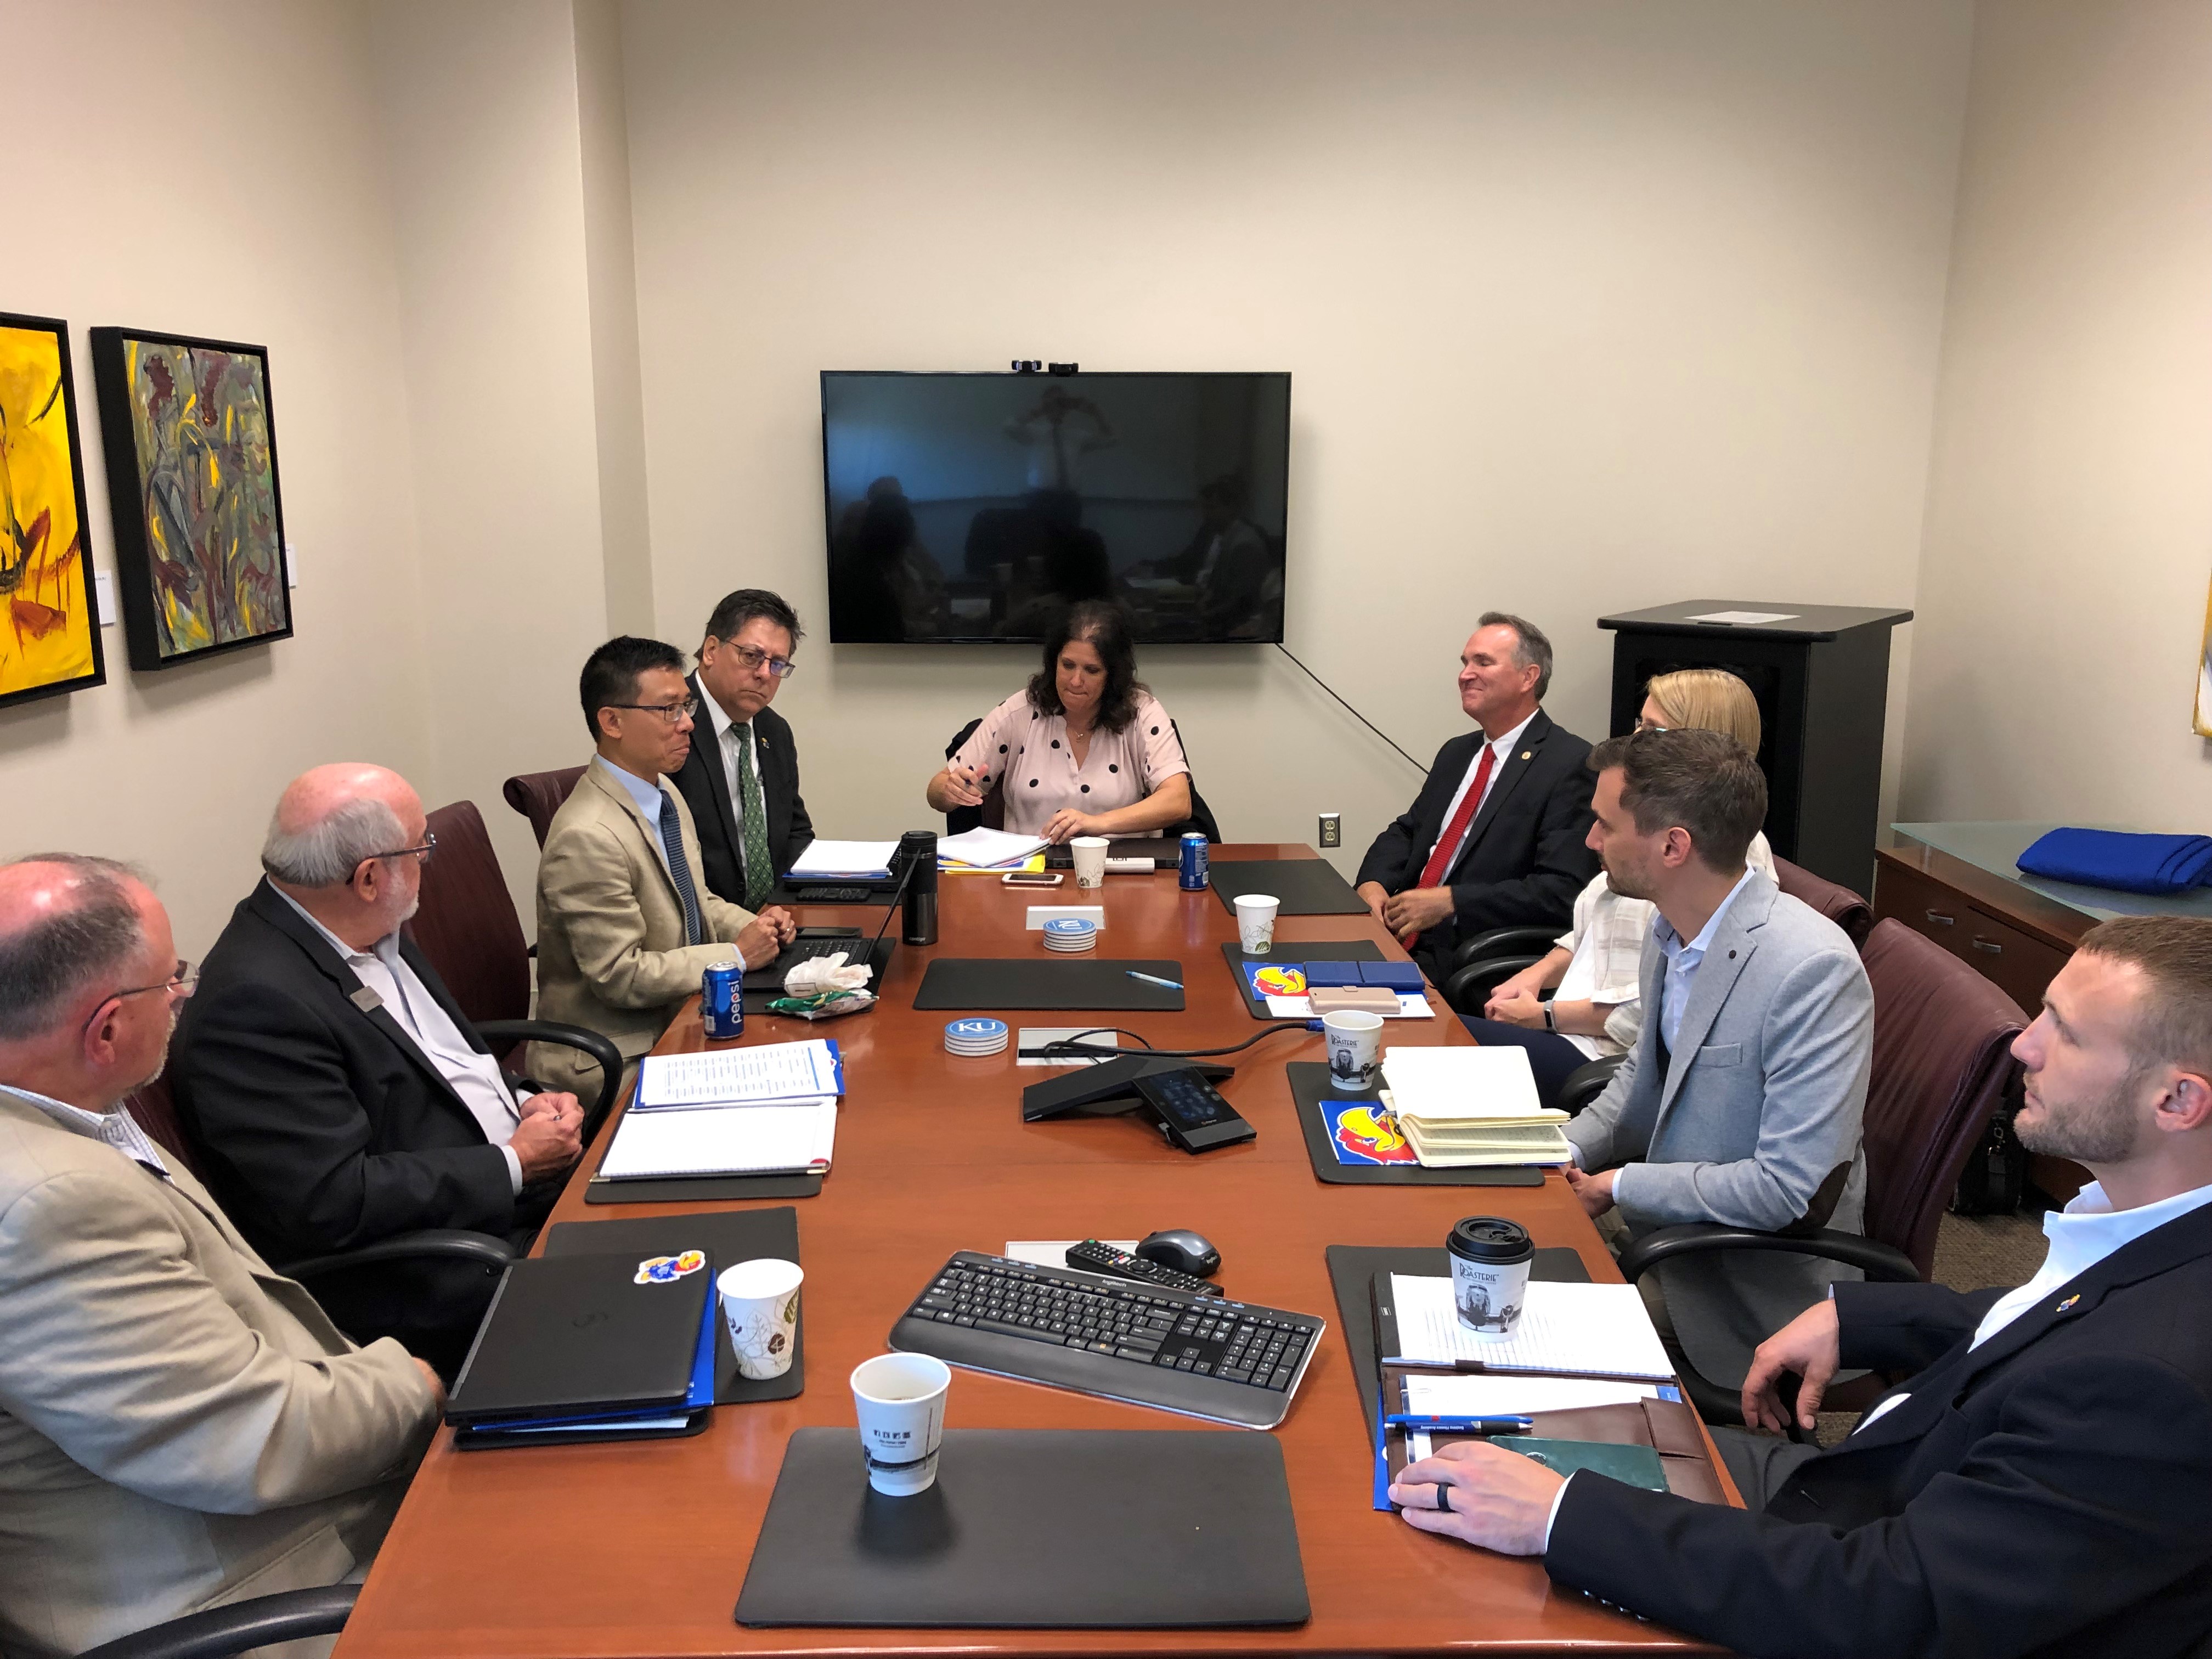 Government and Kansas University leaders meet to discuss collaborative projects for ensuring a highly-skilled government workforce.